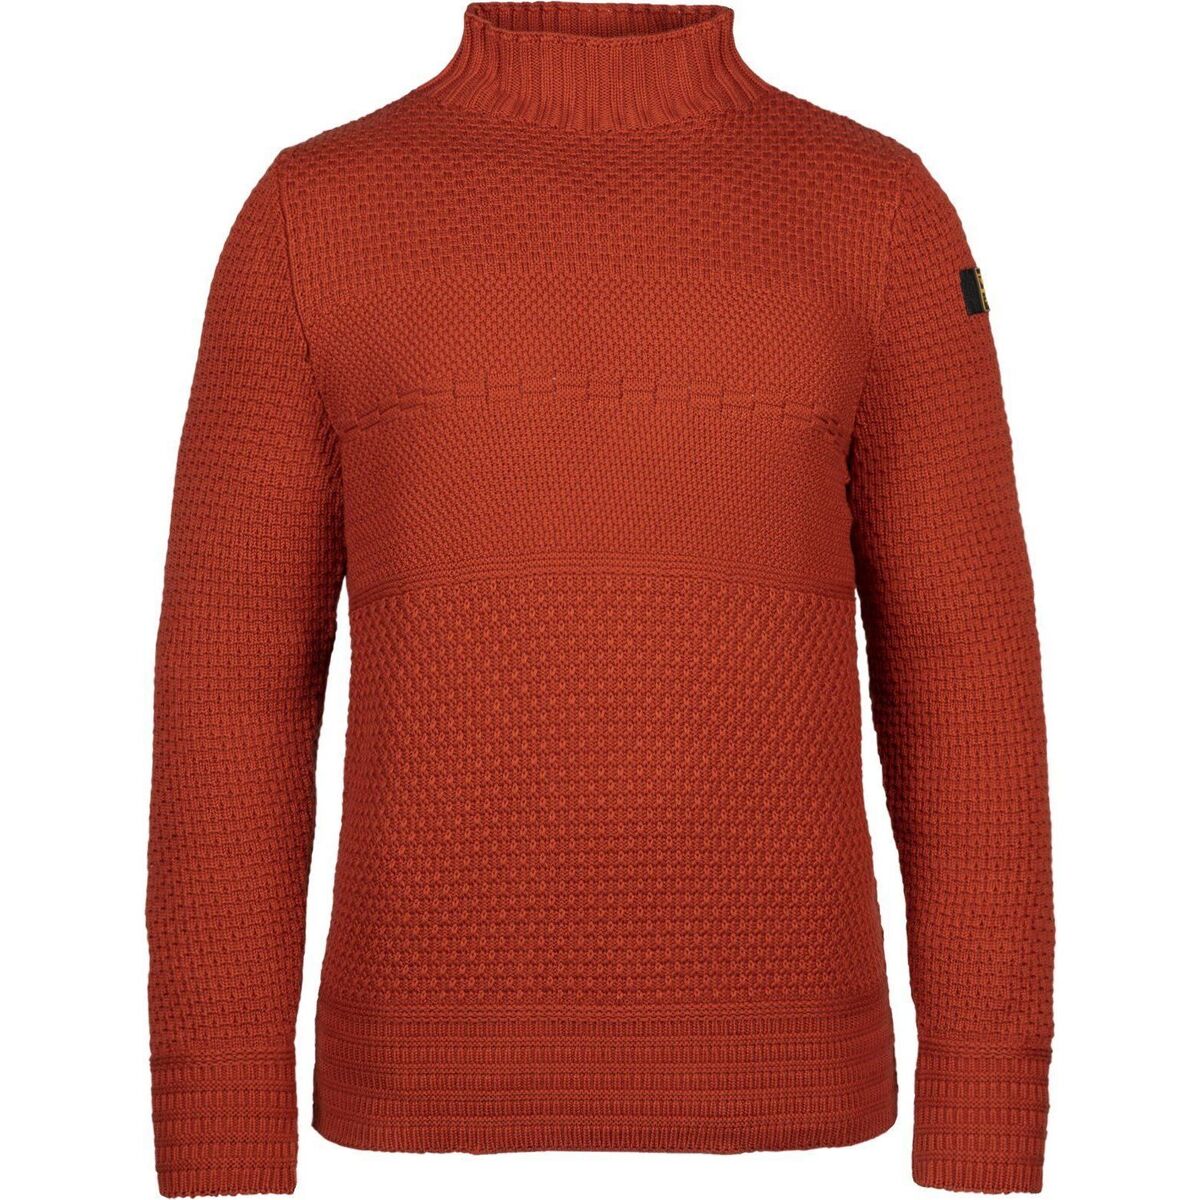 Textiel Heren Sweaters / Sweatshirts Pme Legend Coltrui Knitted Rood Rood